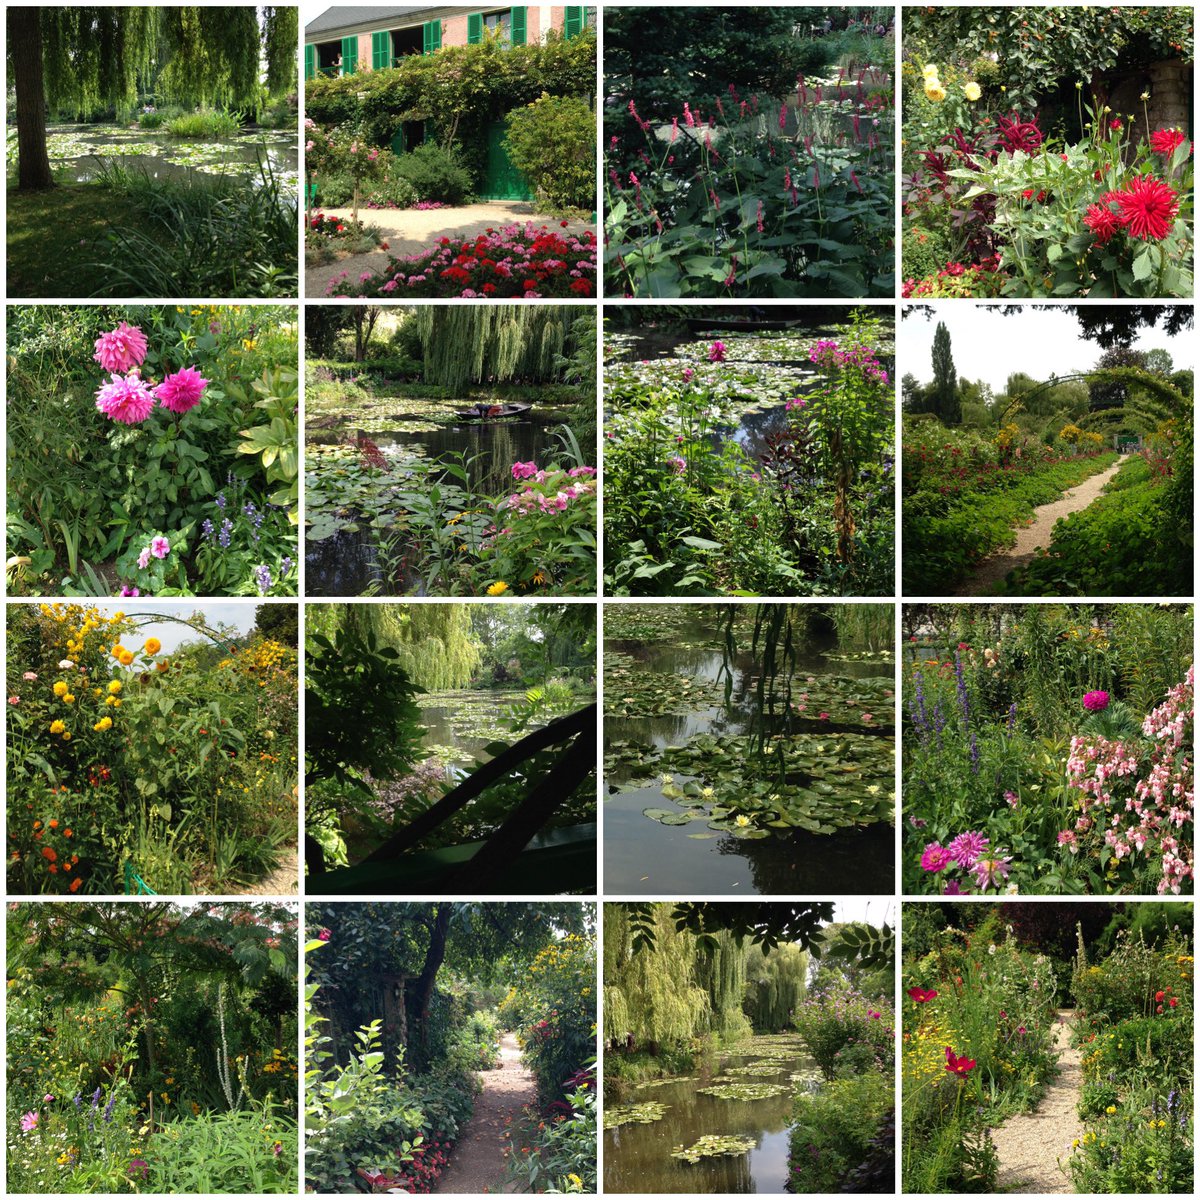 I’ve just found more photos from my beautiful trip to Monet’s house & garden (Giverny) a fair few years ago. It’s not all water lilies, there are wonderful little passageways lined with flowers and foliage to spark your imagination… Can’t wait to return one day… 🥰🪷🌿🌺